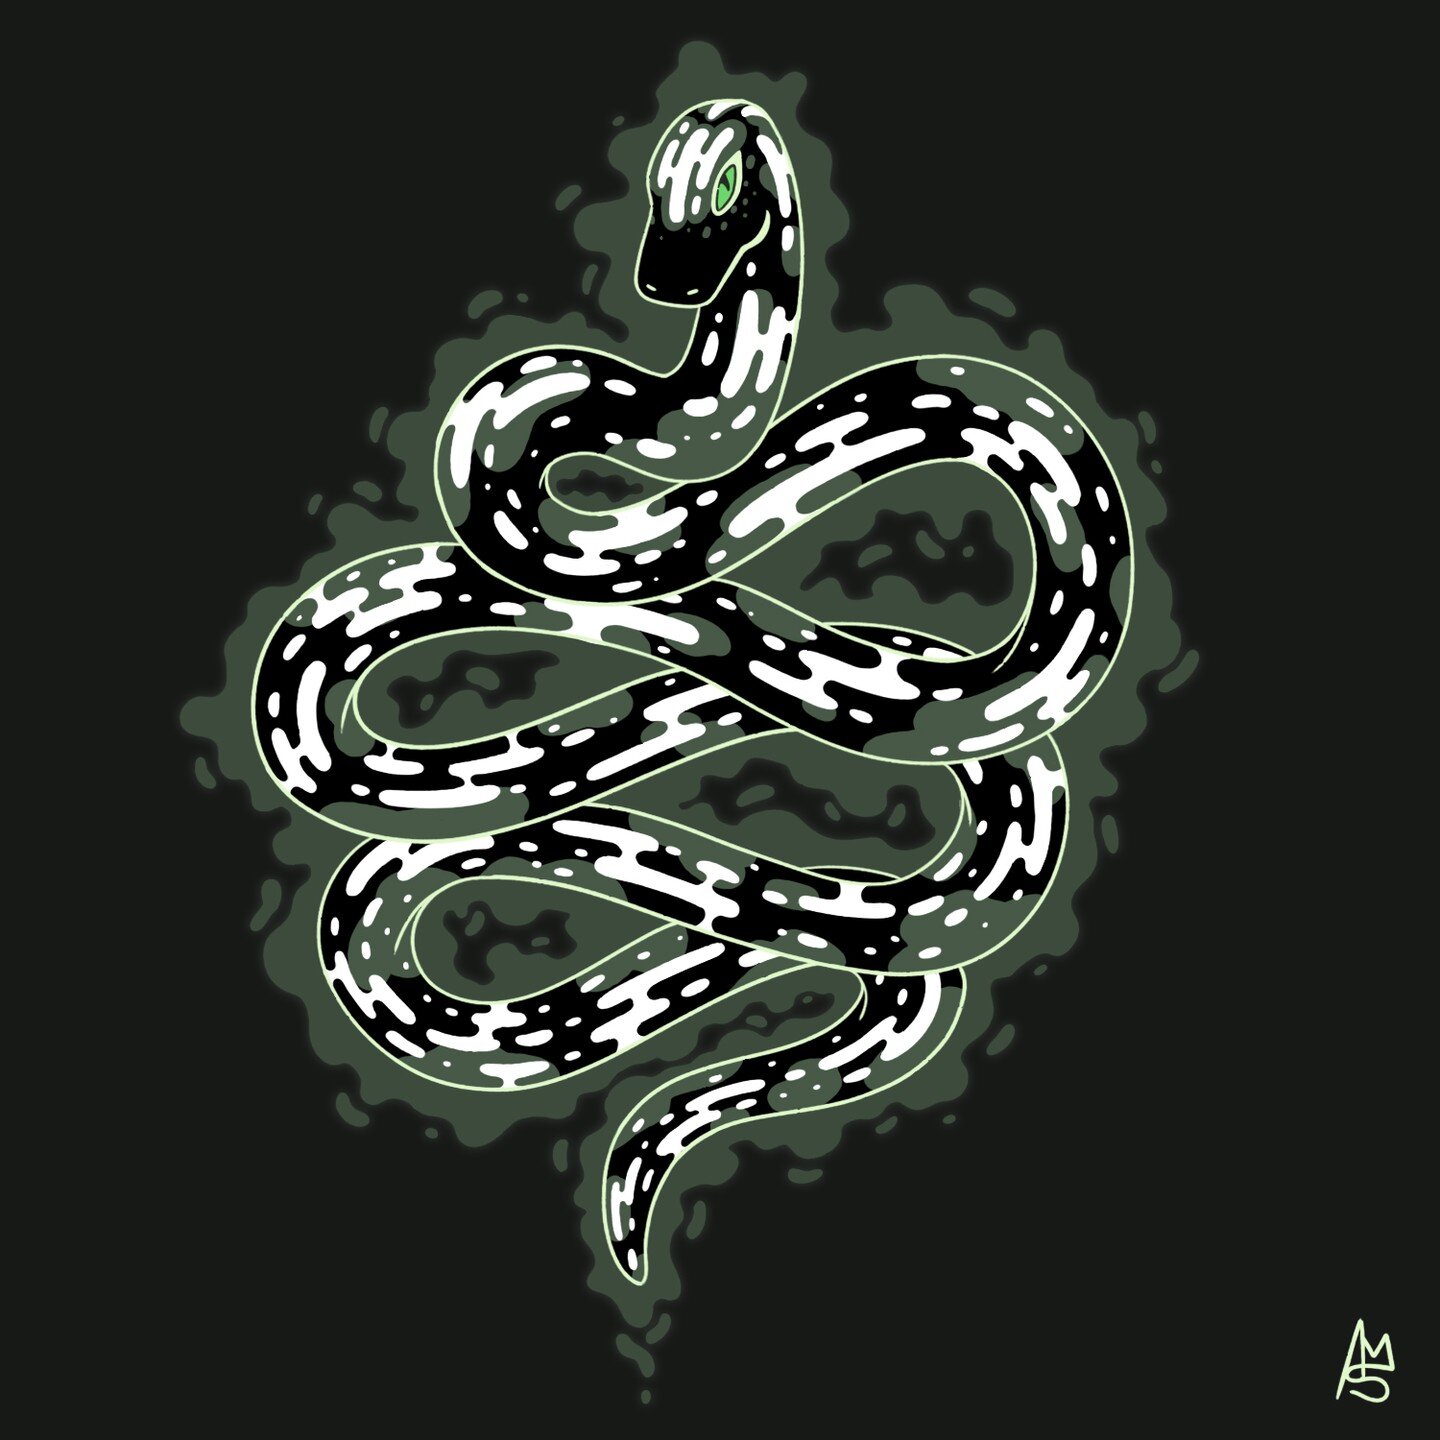 Been thinking of snakes more and more lately. So much so that this just popped out today. Couldn't decide on which color scheme to go with so here's both.